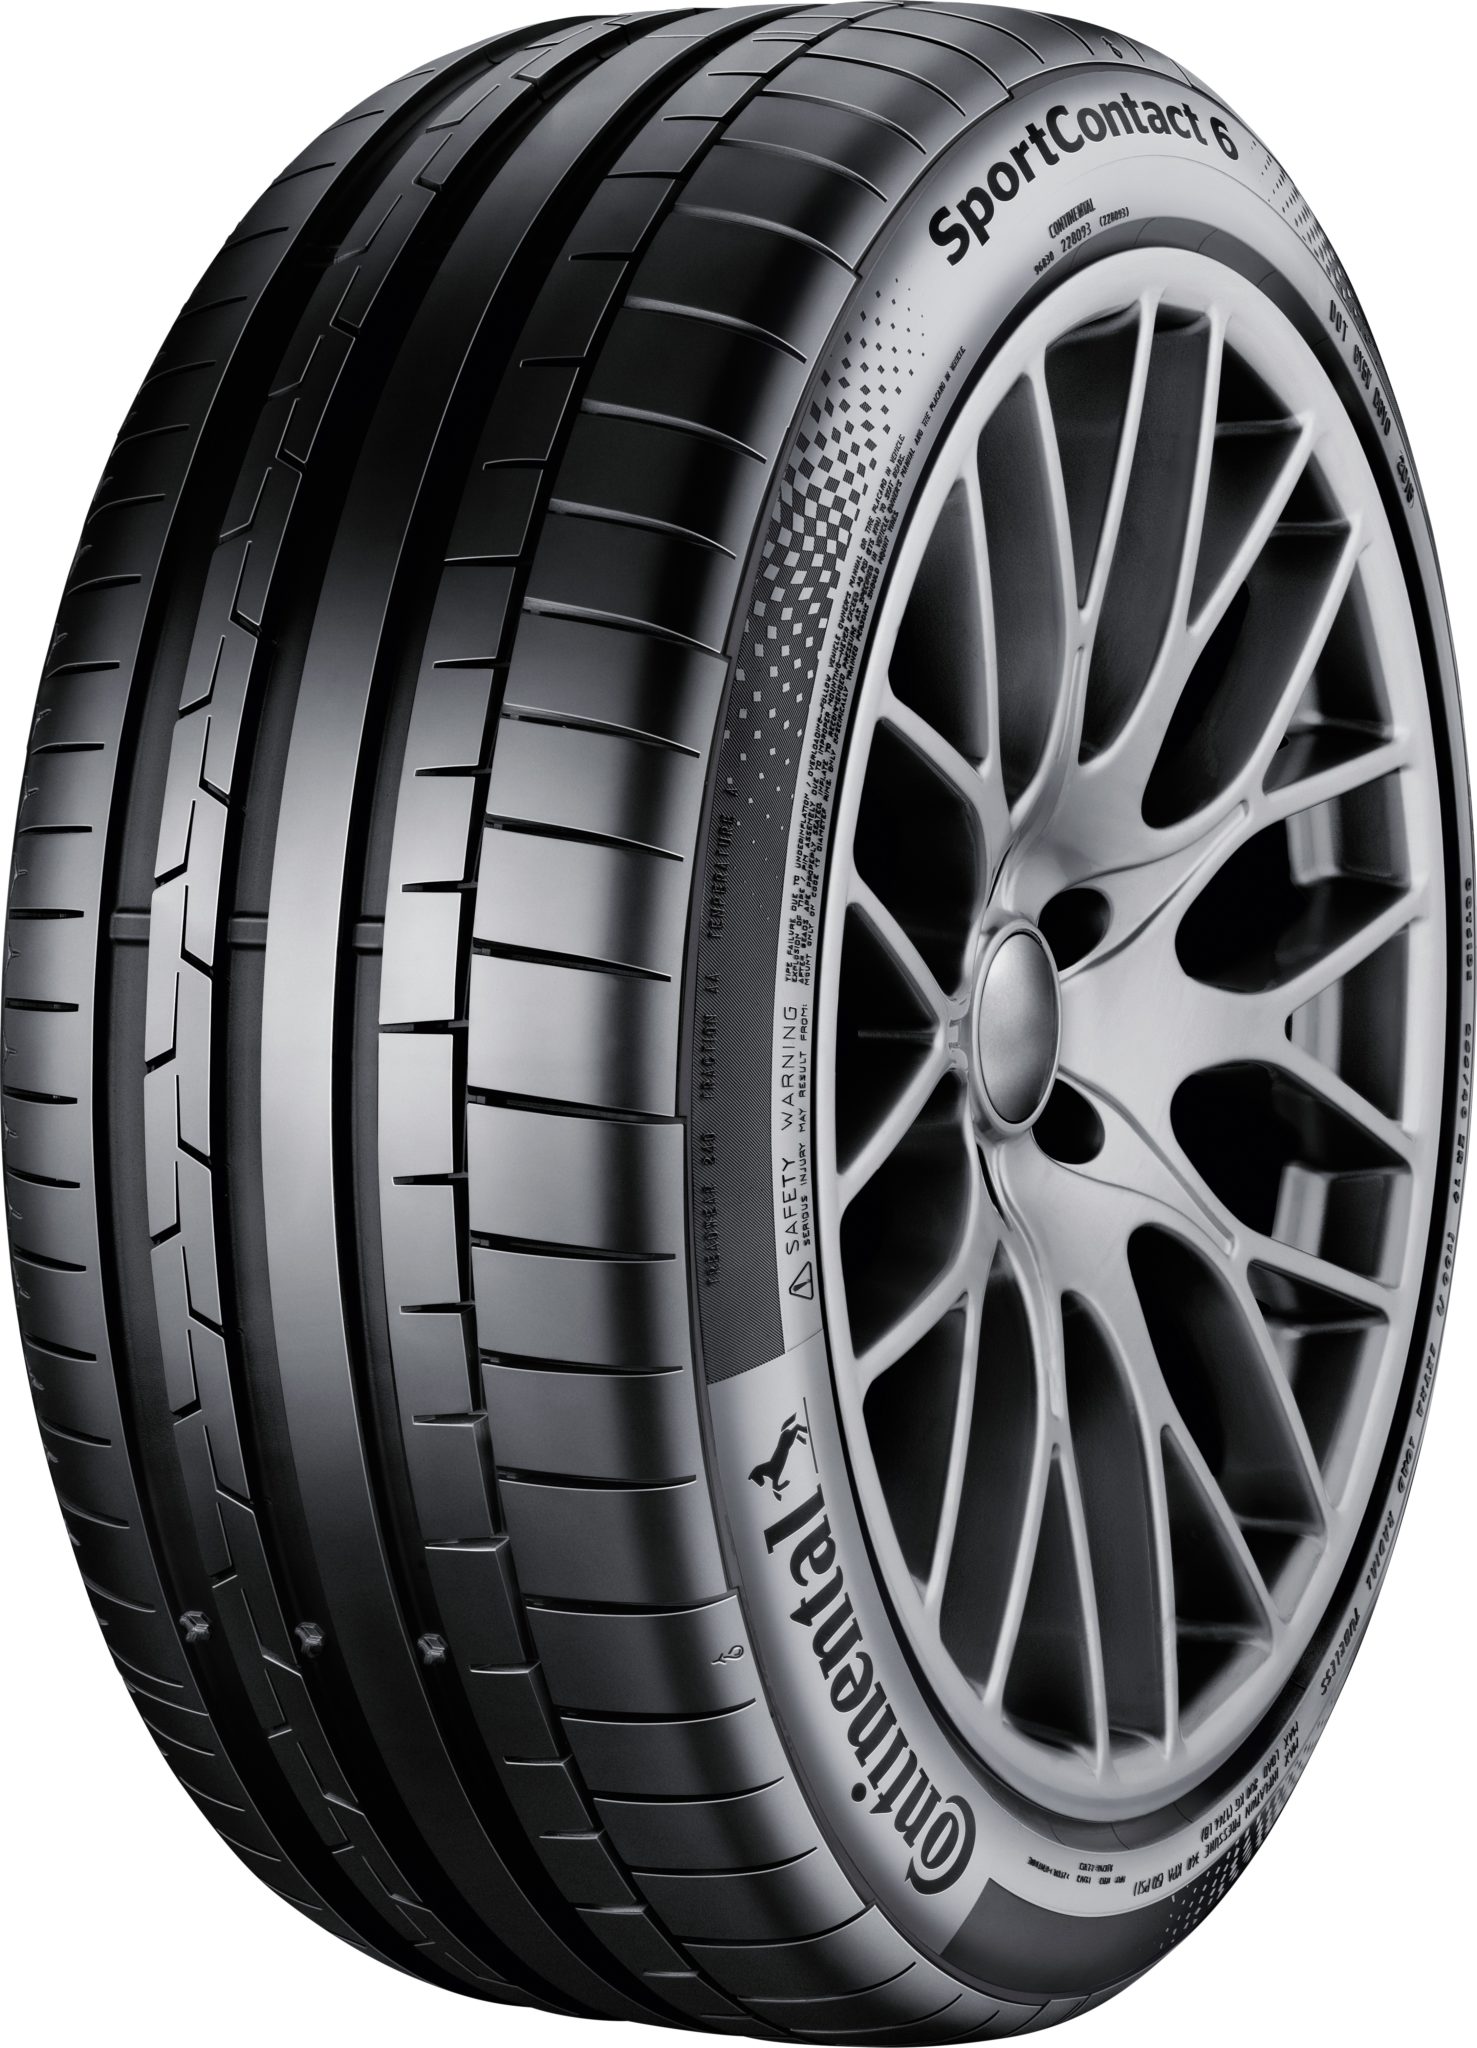 Onheil Monopoly Electrificeren Continental SportContact 6 represents manufacturer's UHP edge - Tyrepress